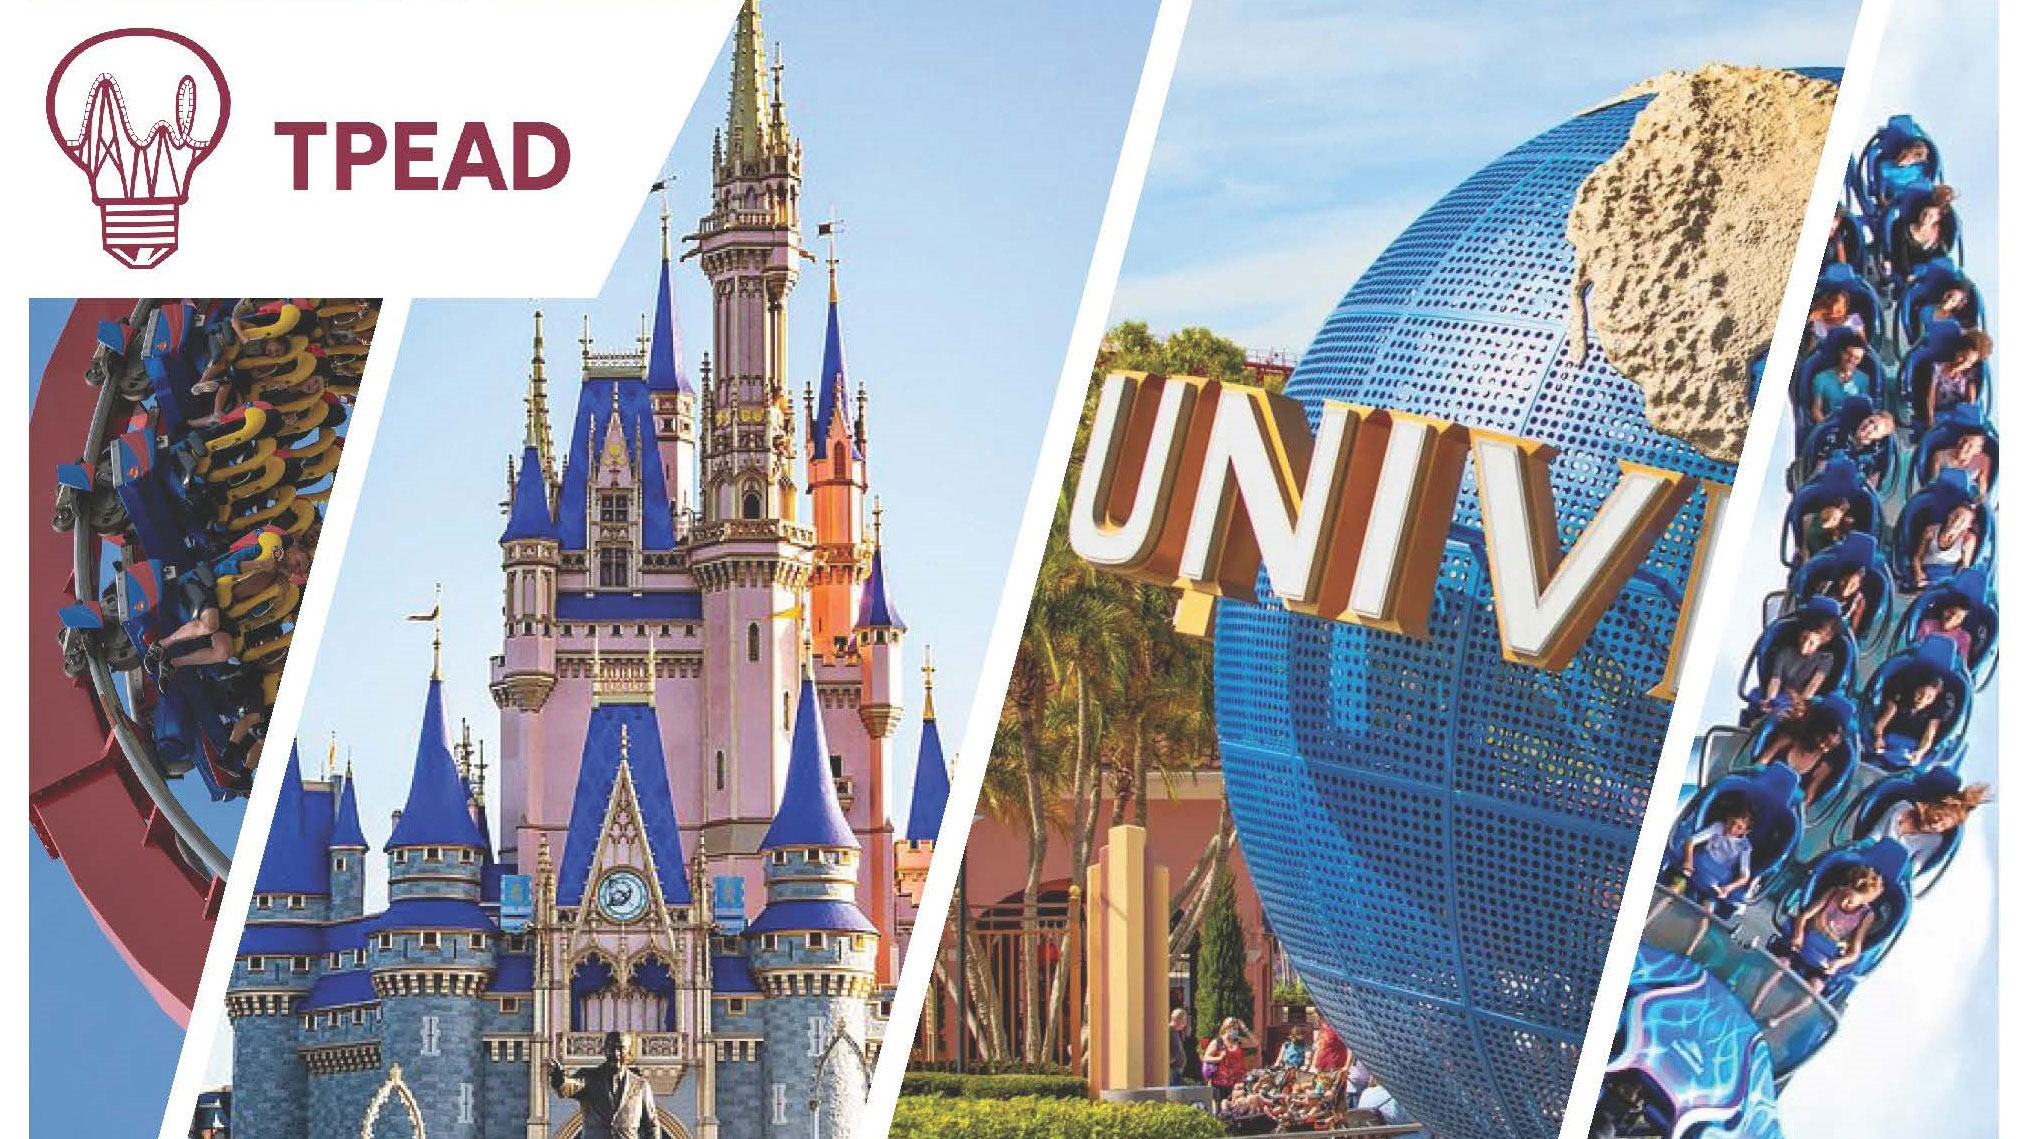 TPEAD logo in the upper-left corner, superimposed over four images of theme parks including Disneyland and Universal Studios.